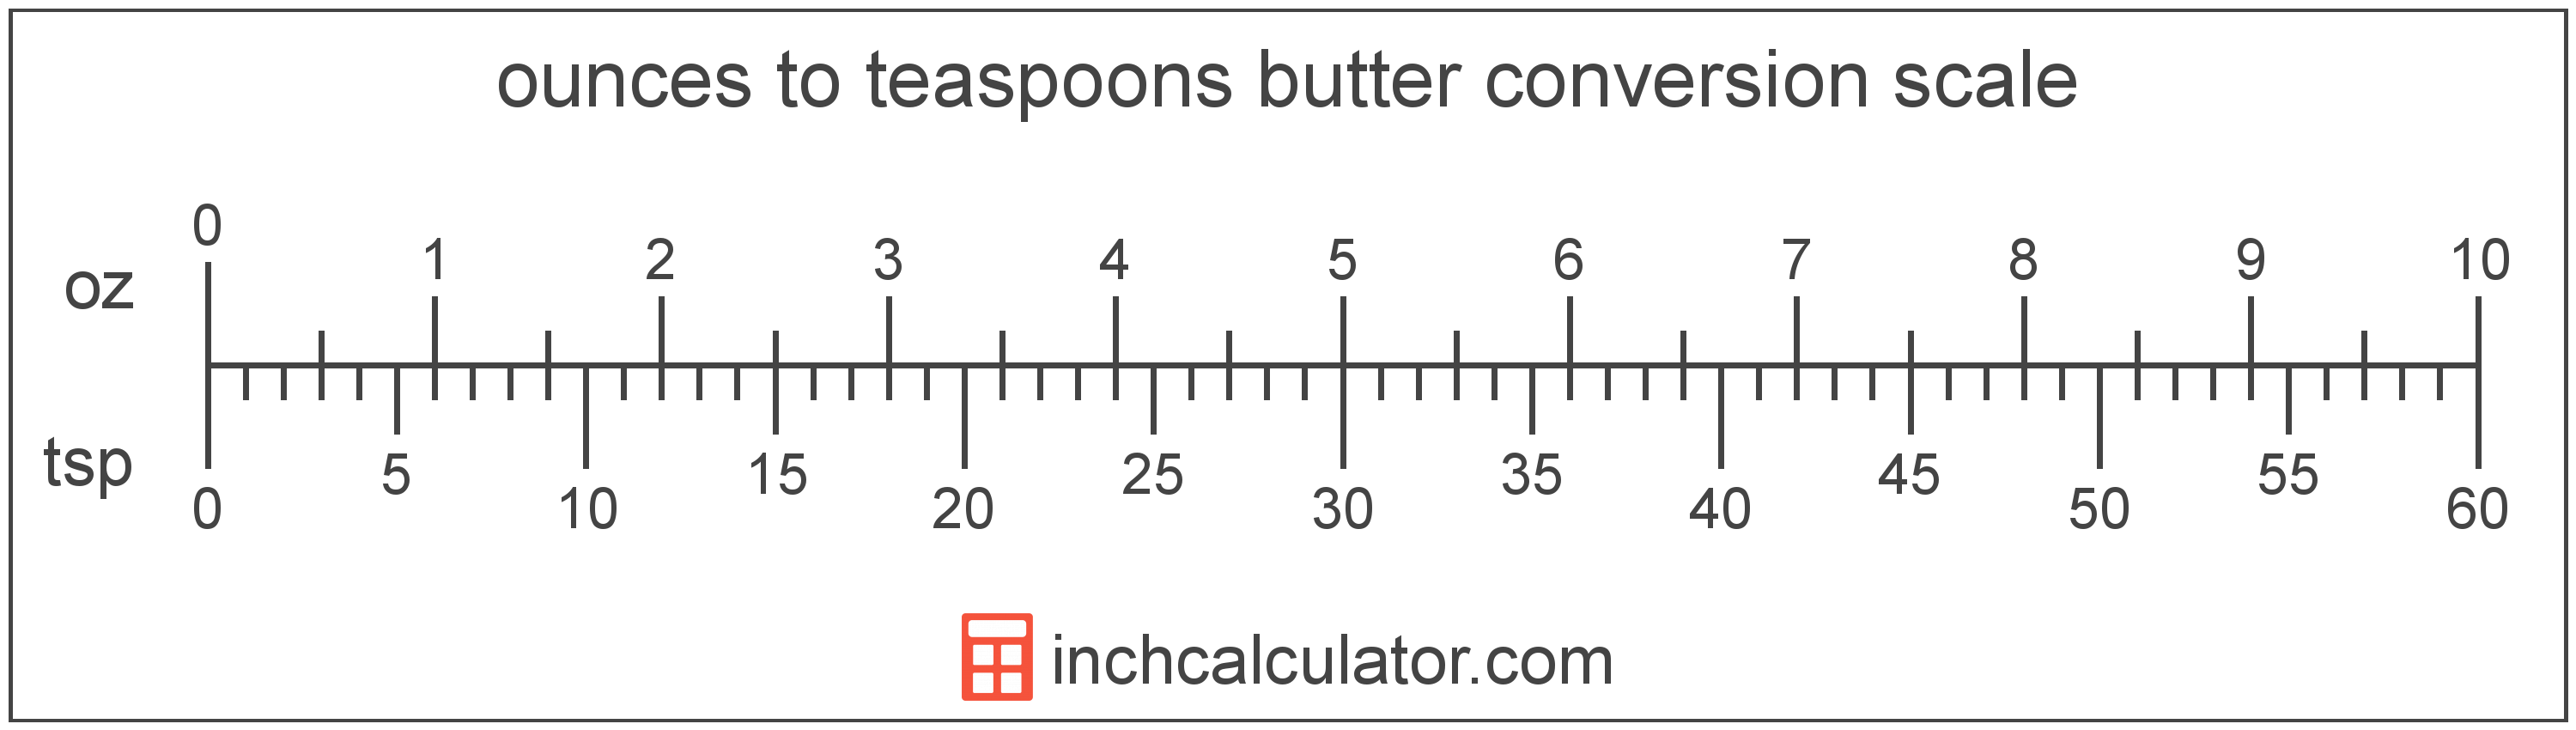 conversion scale showing teaspoons and equivalent ounces butter values